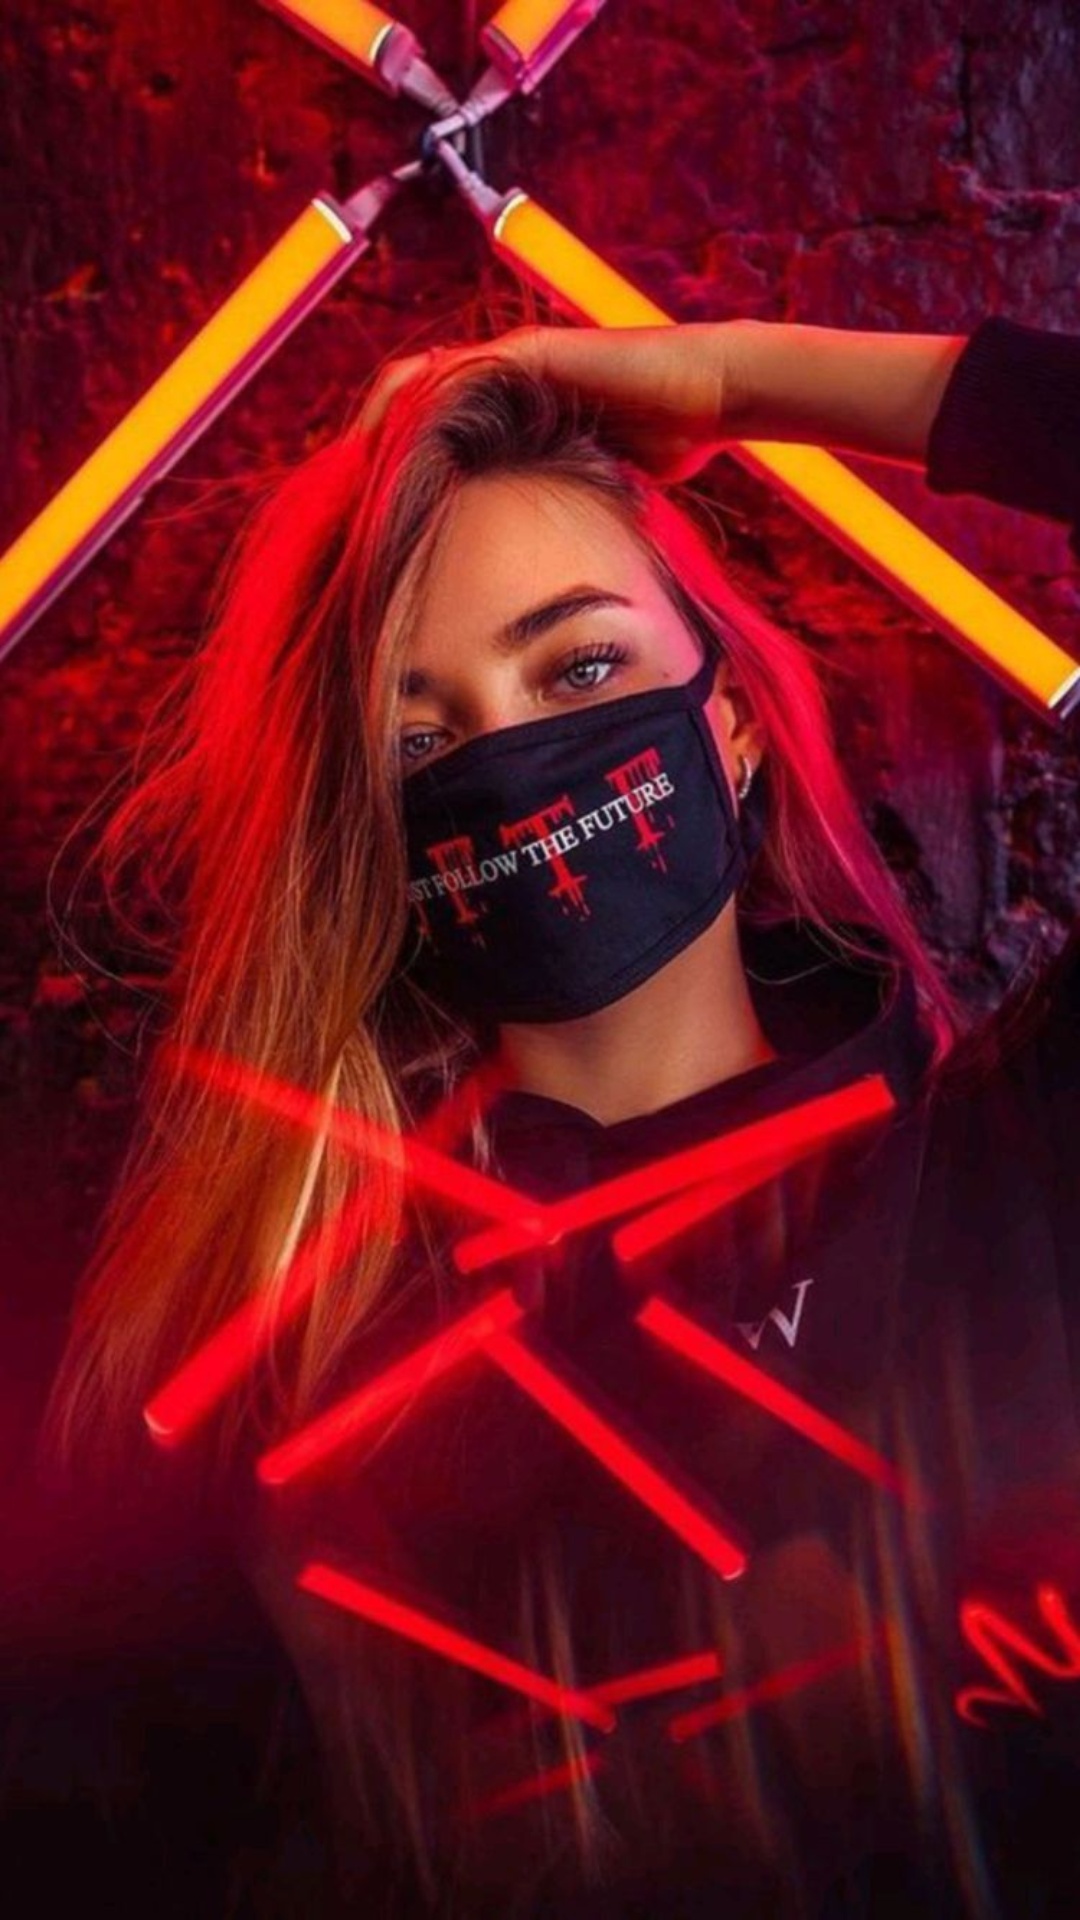 Neon Mask Girl Wallpaper Pictures